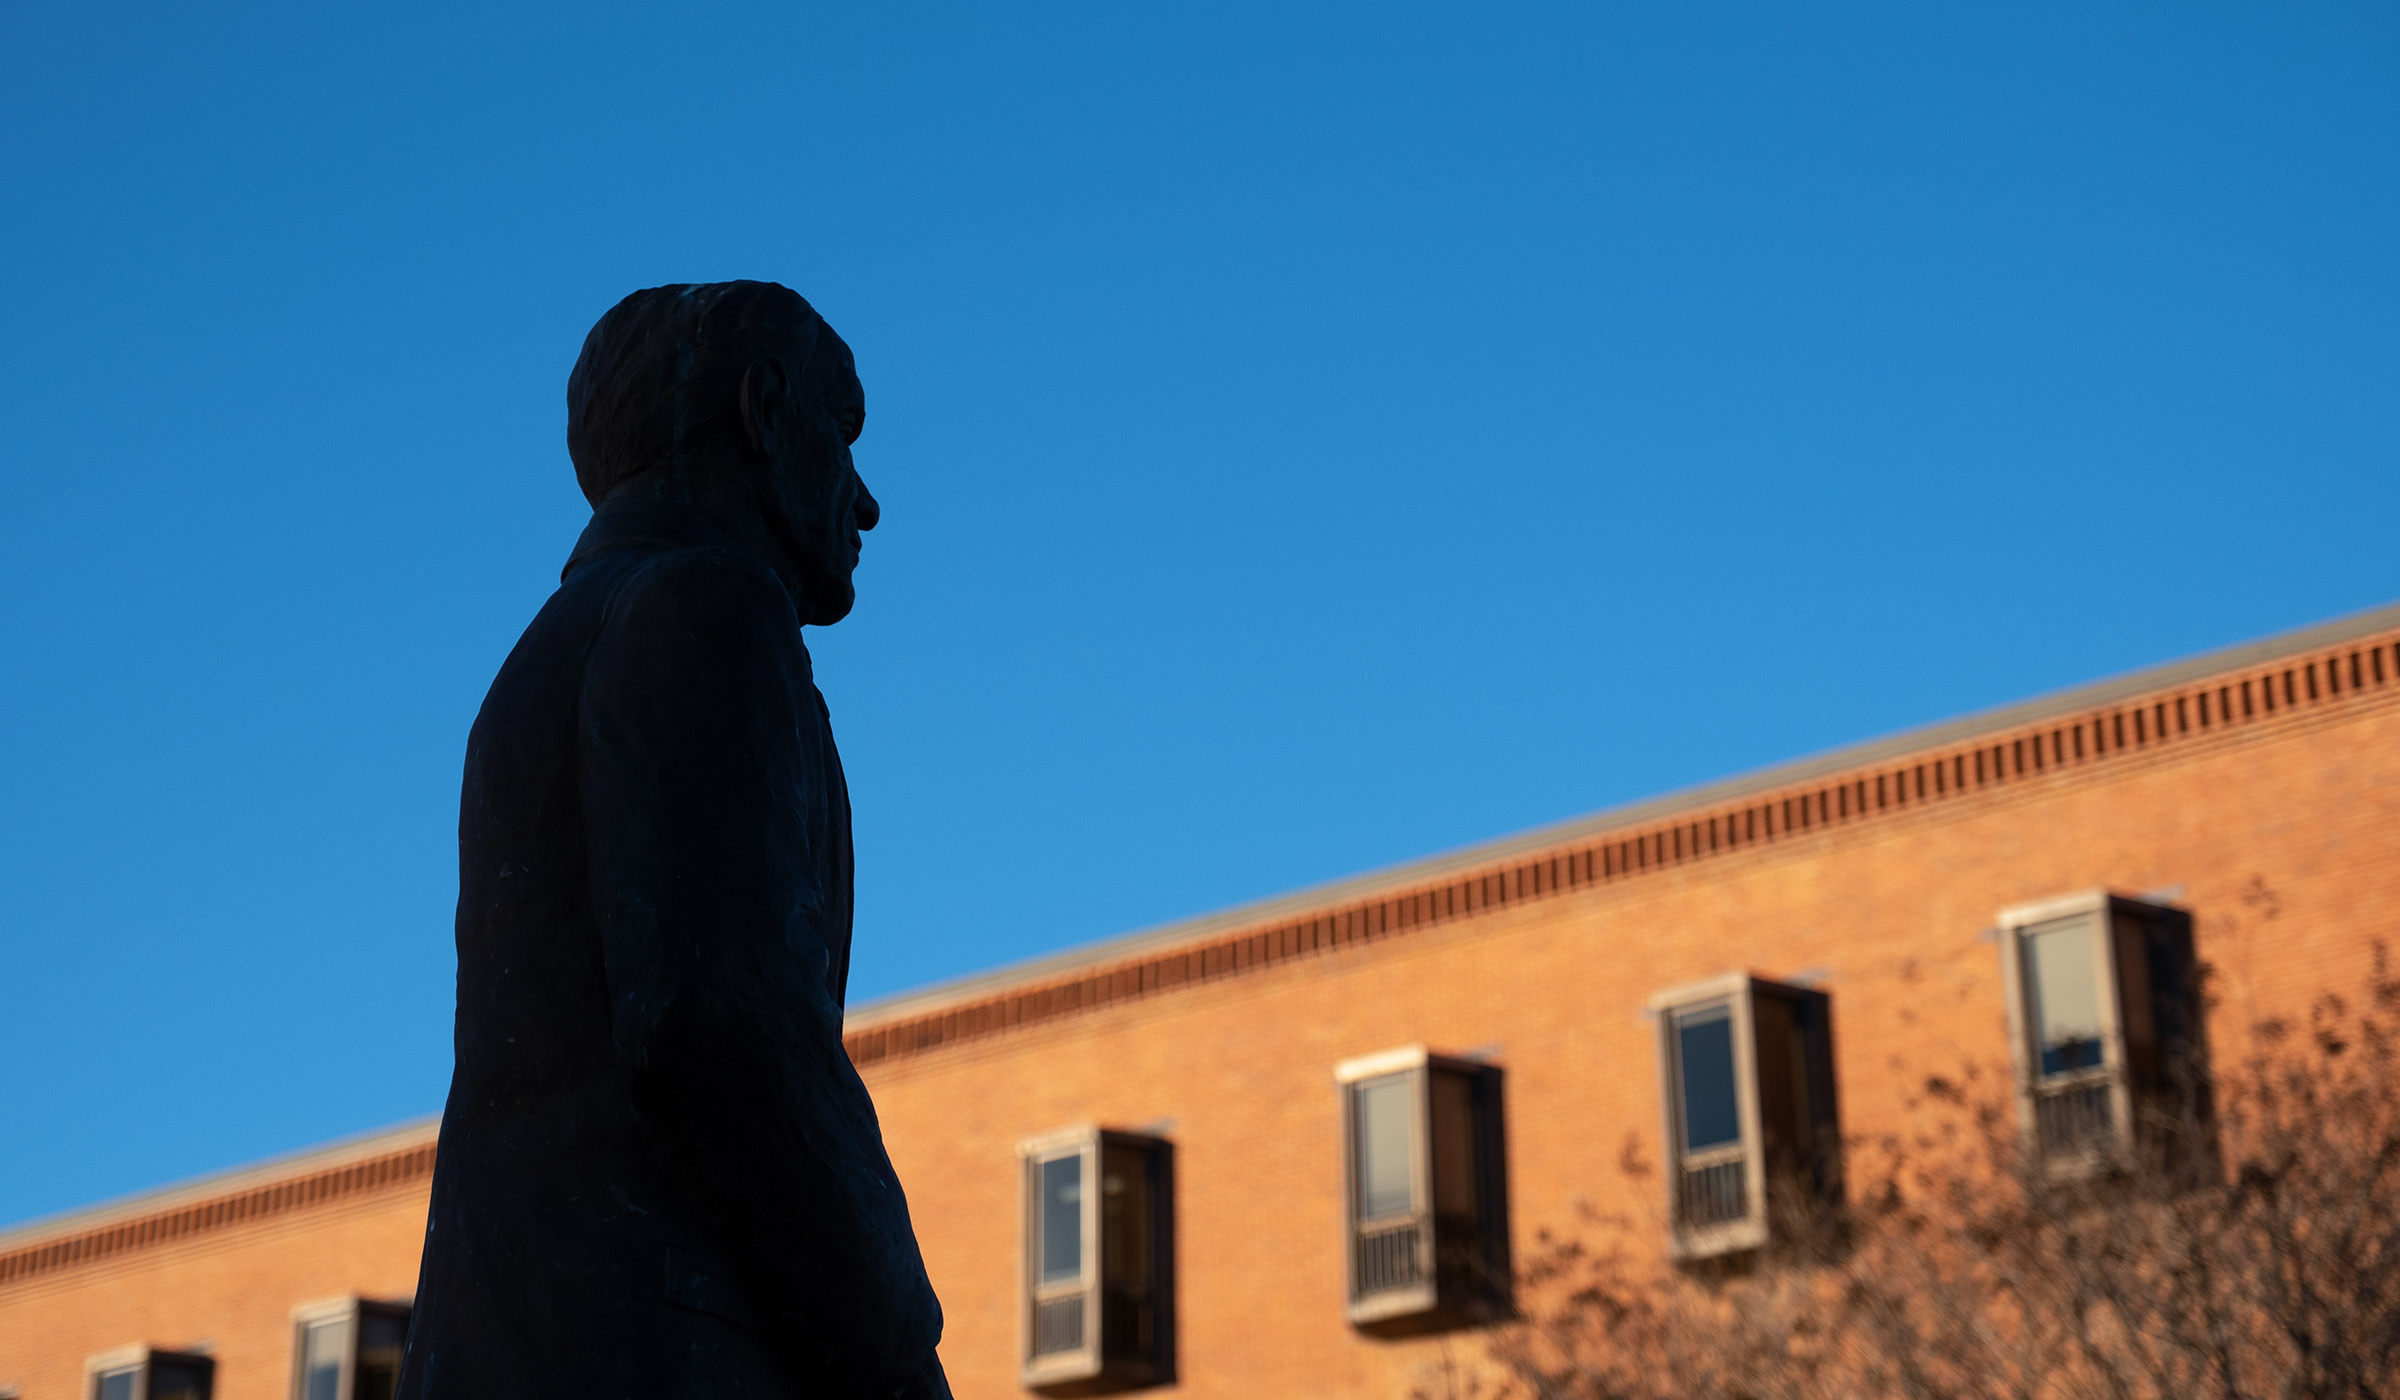 The Sonny Montgomery statue stands in silhouette with blue sky and McCool beyond.